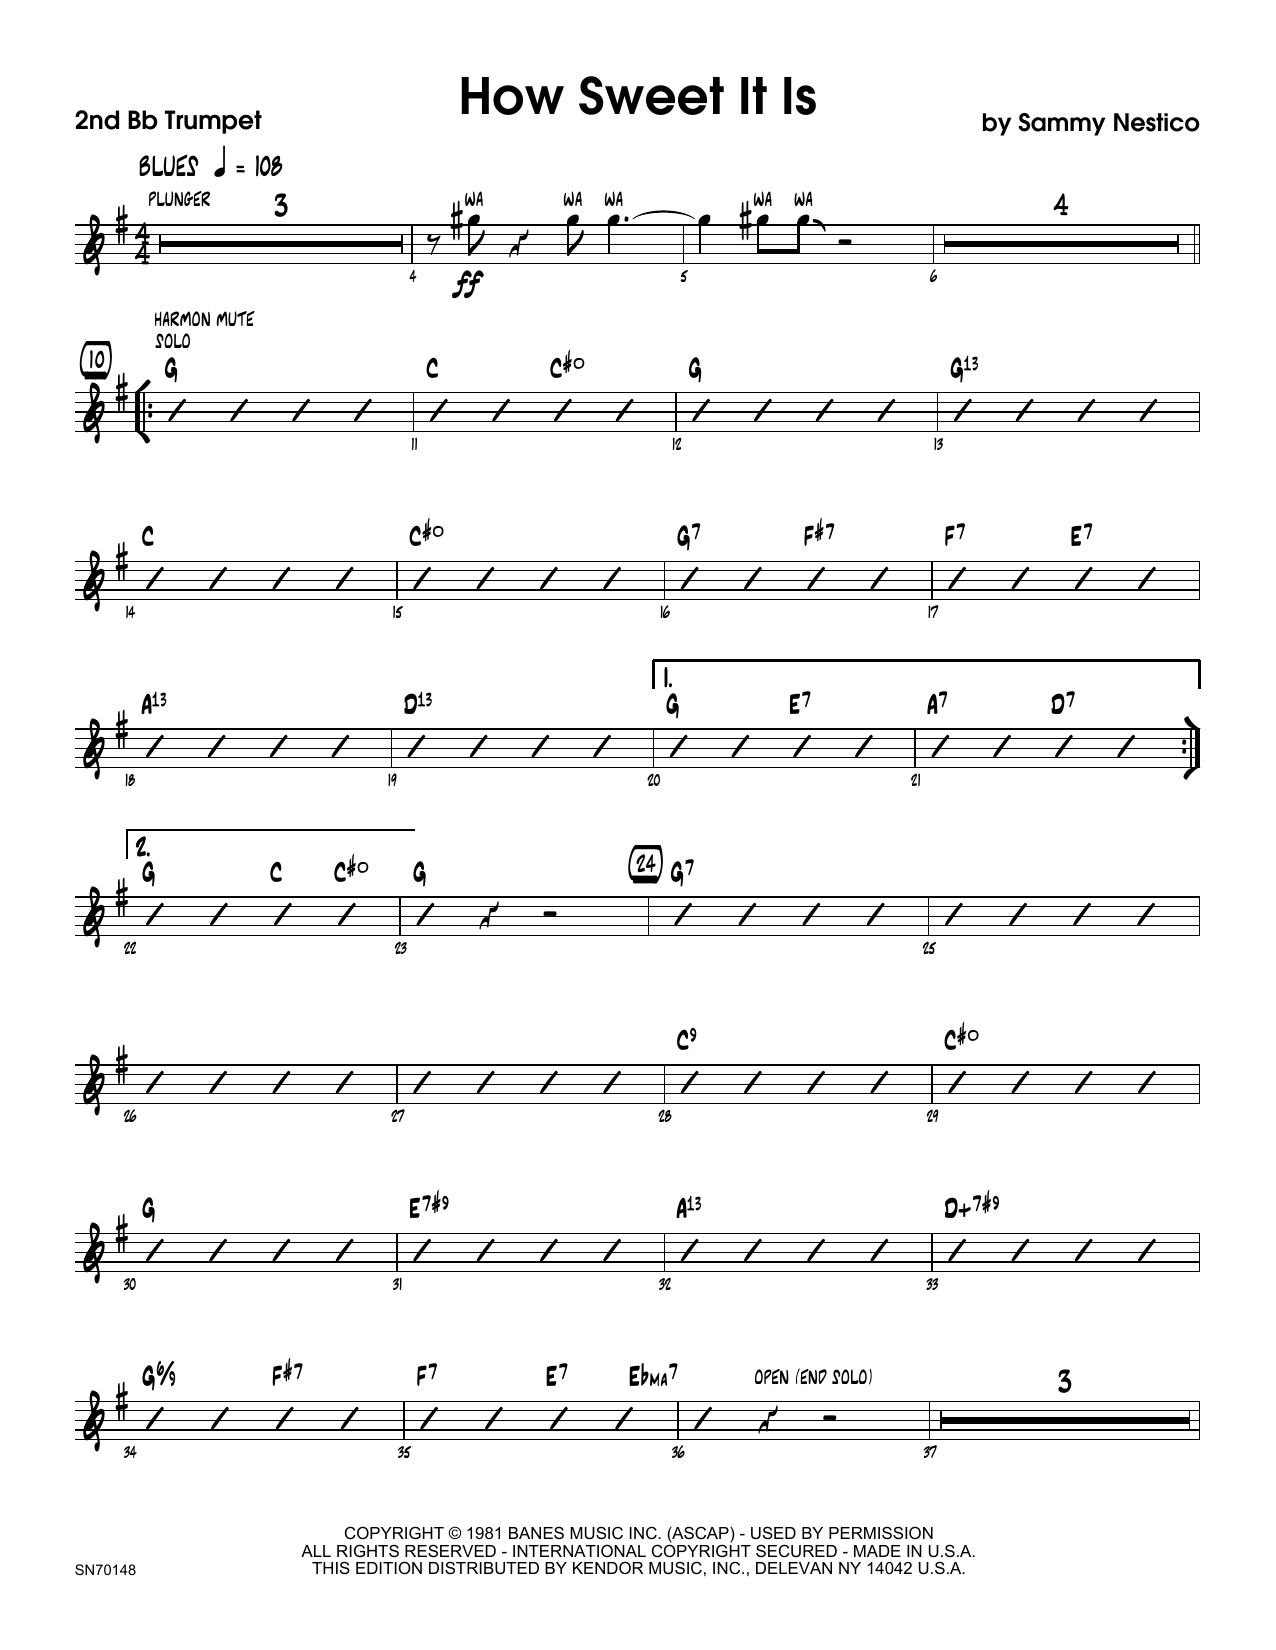 Download Sammy Nestico How Sweet It Is - 2nd Bb Trumpet Sheet Music